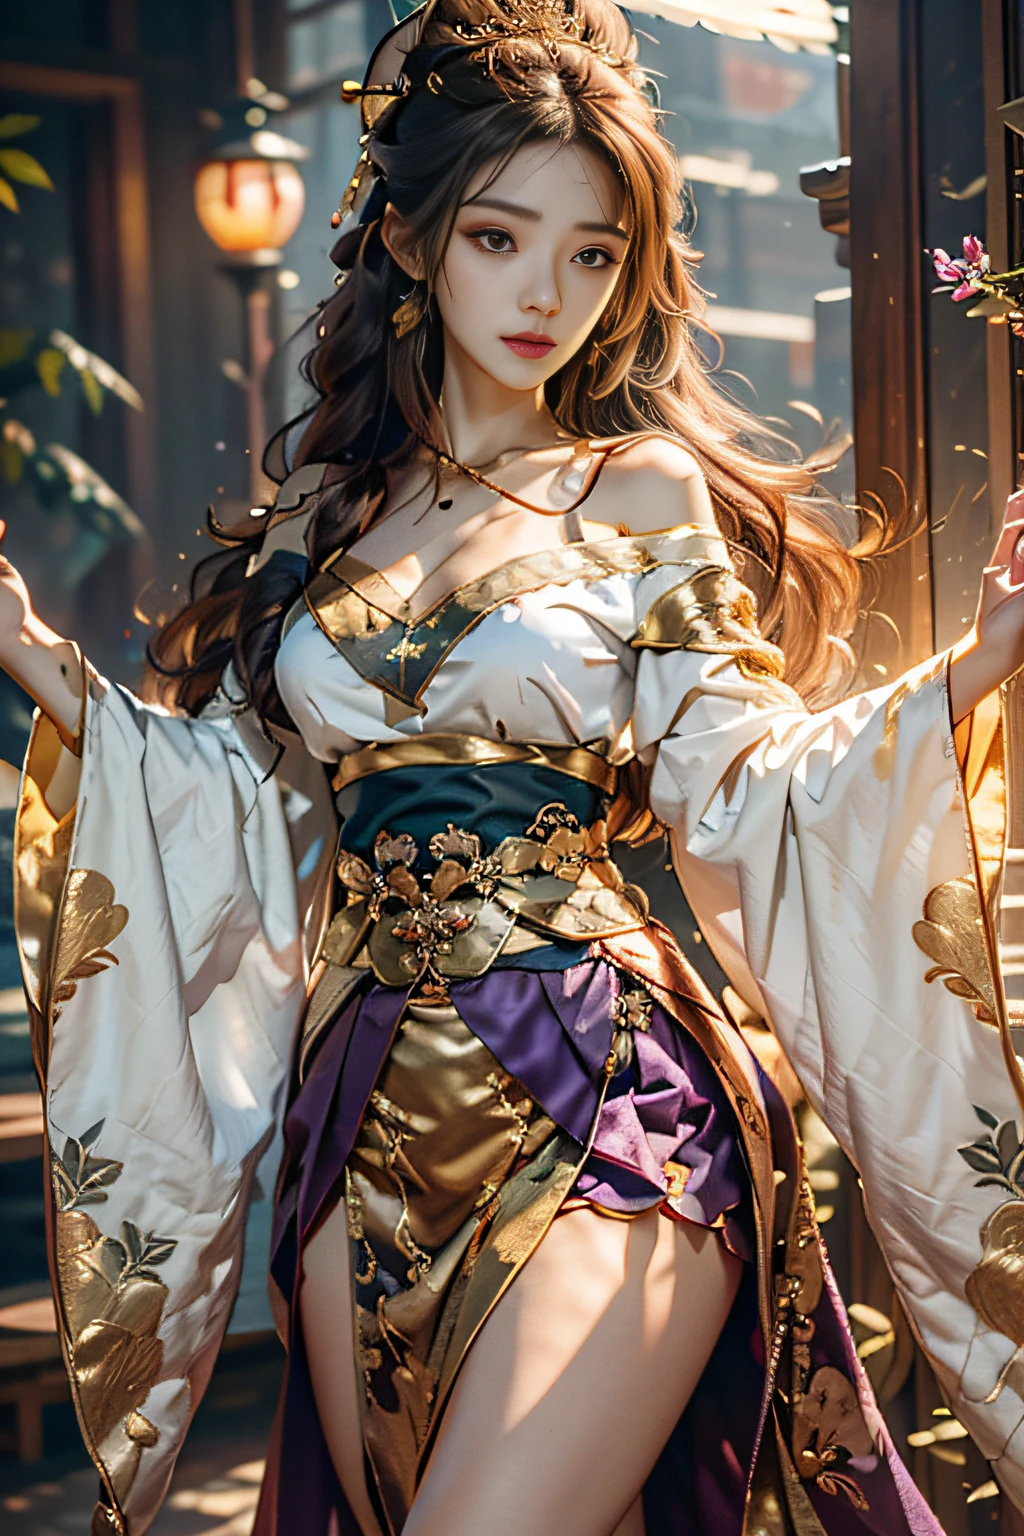 Superb Quality, Masterpiece, High Resolution, (Exquisite Body: 1.5), Beauty, Bare Shoulders, Oversized Breasts (2.5) Wide Buttocks, Thin Waist, Stunning Beauty, (Milky Skin: 1.3), Exquisite Details, High Resolution, Wallpaper, 1 Woman, Solo, Dress, Hair Accessories, (((Golden Purple Skirt)), Flower, Long Hair, Brown Hair, Shut Up, Accessories, Long Sleeves, Raised Hands, Wide Sleeves, Big Eyes, Flowing Hair, Hanfu, Hanfu, Embroidery, Long Dress, Natural Pose, Falling Petals, Indoor, Fanning, Lantern, 16K, HDR, High resolution, depth of field, (film grain: 1.1), Bocon, prime time, (lens flare), vignetting, rainbow, (color grading: 1.5)